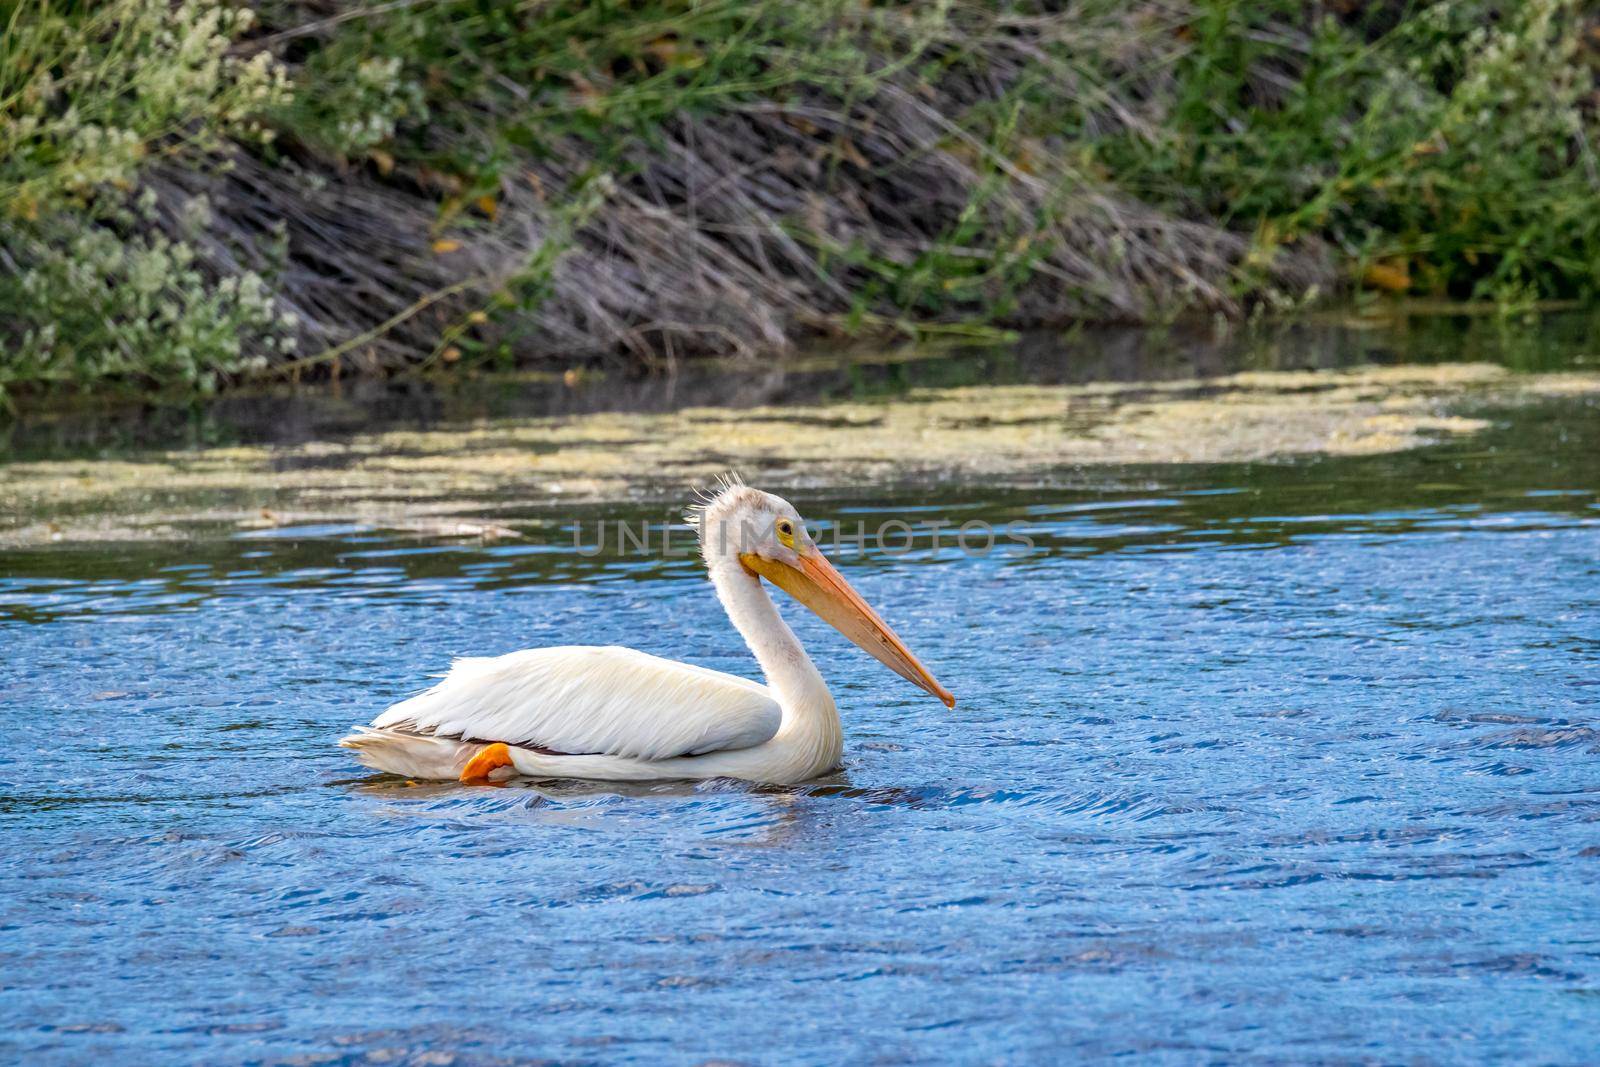 An American White Pelican swimming in water